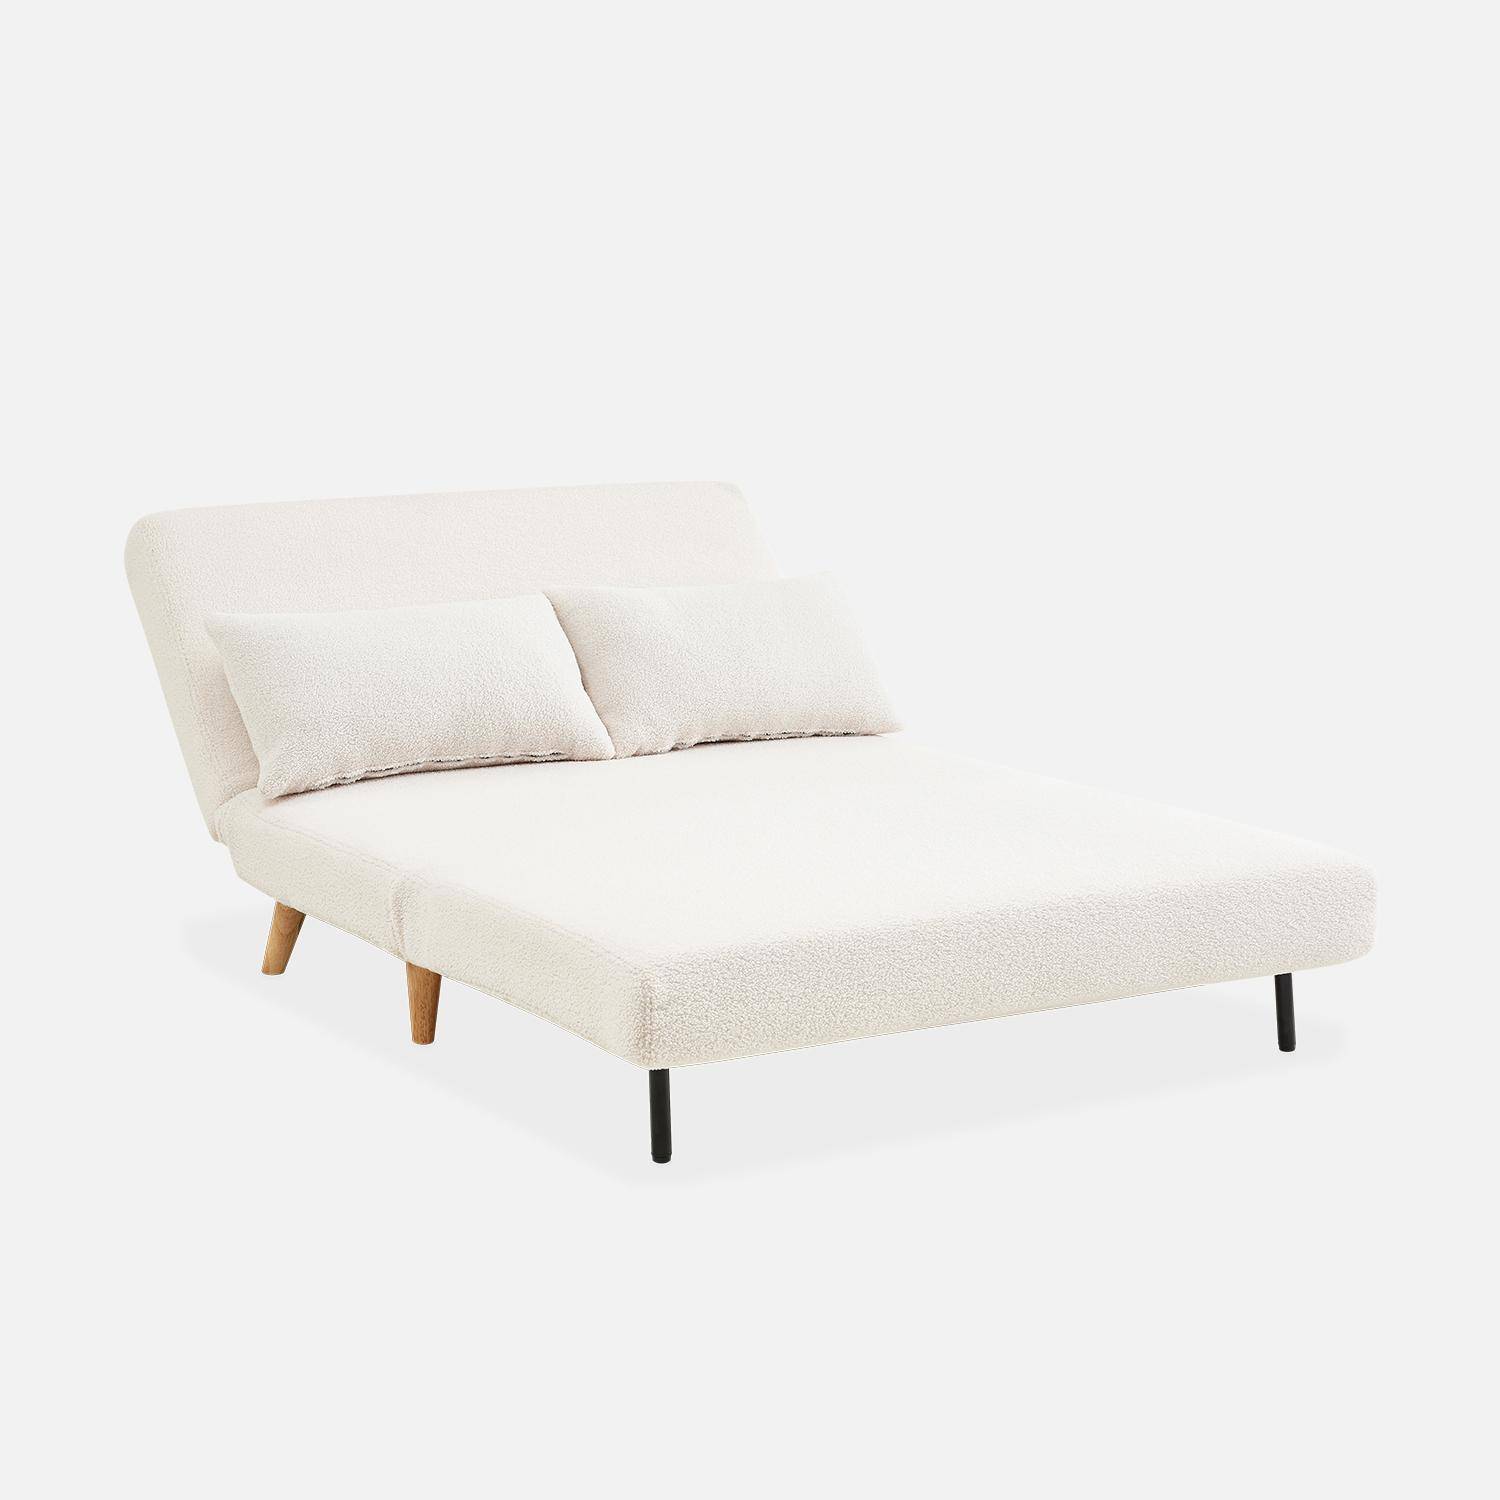 Sleeper, 2-Seater Convertible Sofa with Wooden Legs,  L120xW81xH82cm, white bouclette,sweeek,Photo6